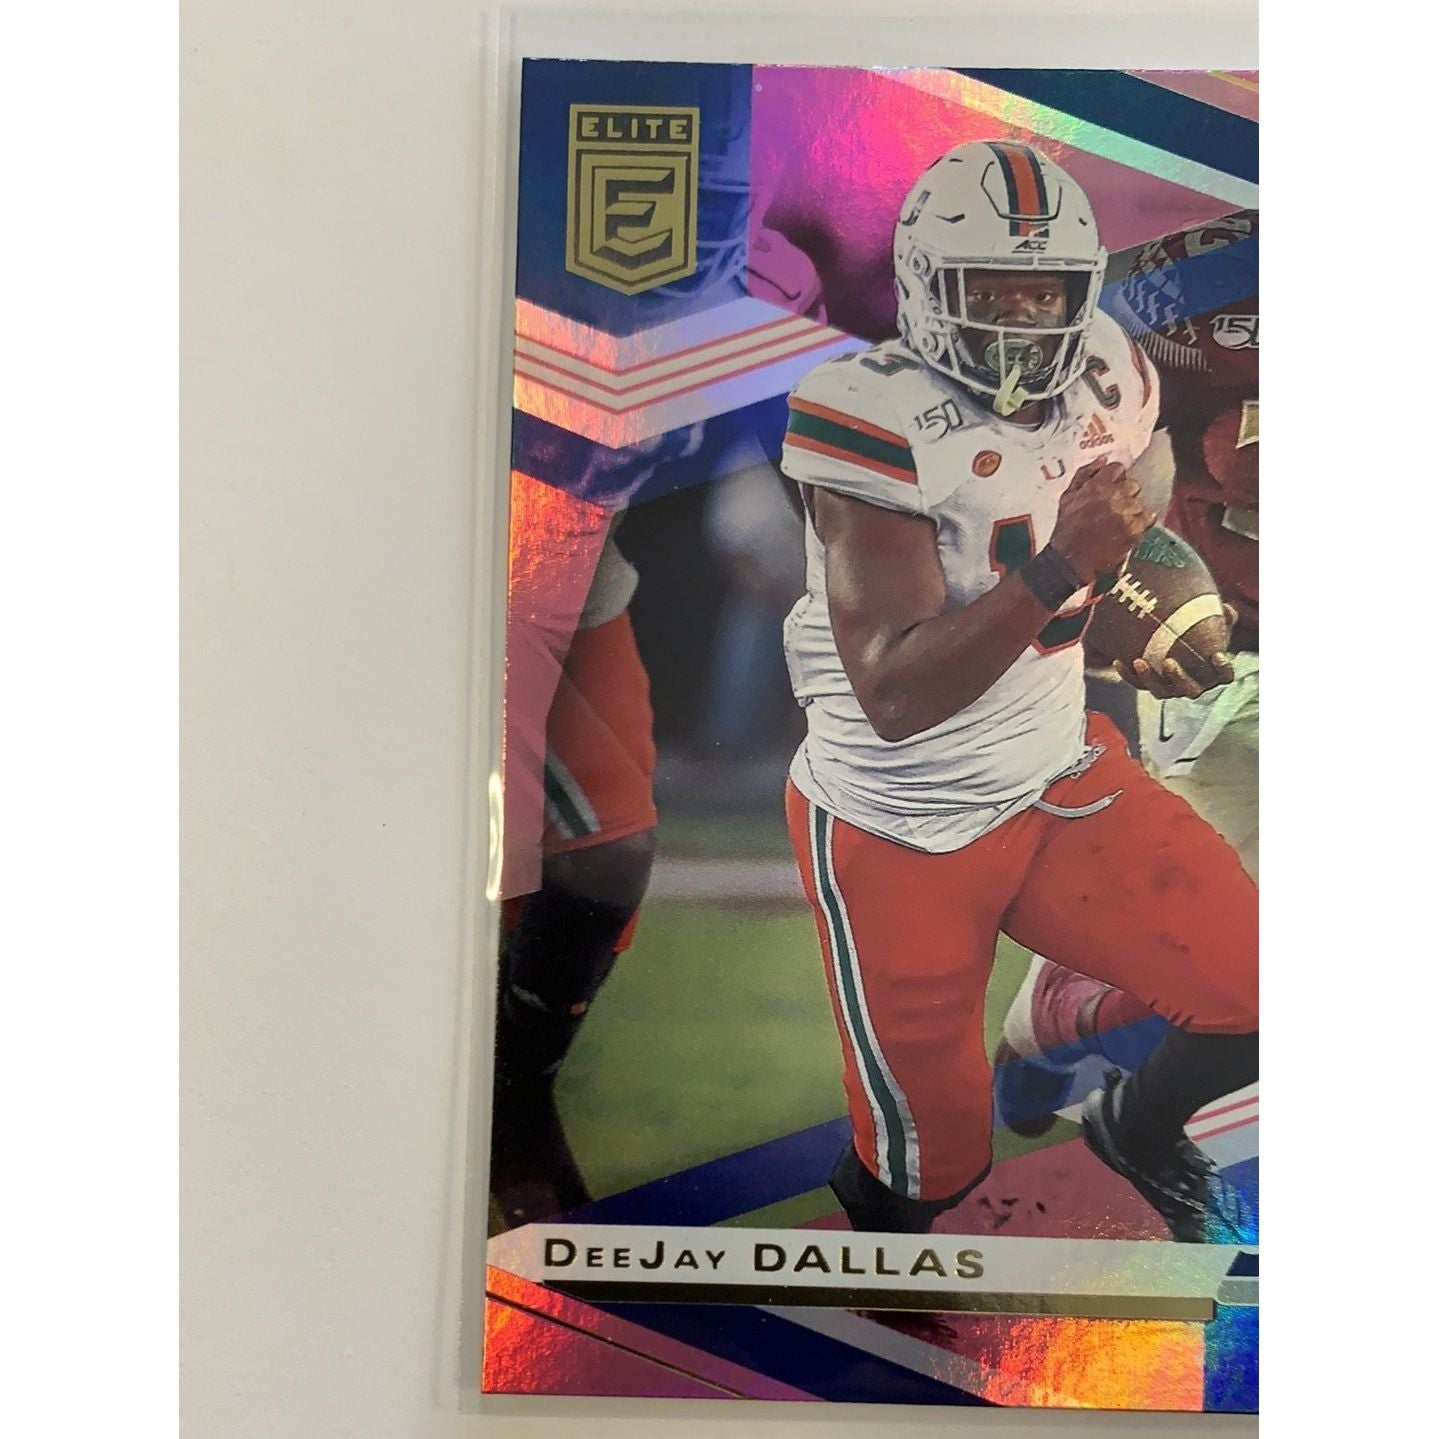  2020 Donruss Elite DeeJay Dallas RC Pink Parallel  Local Legends Cards & Collectibles